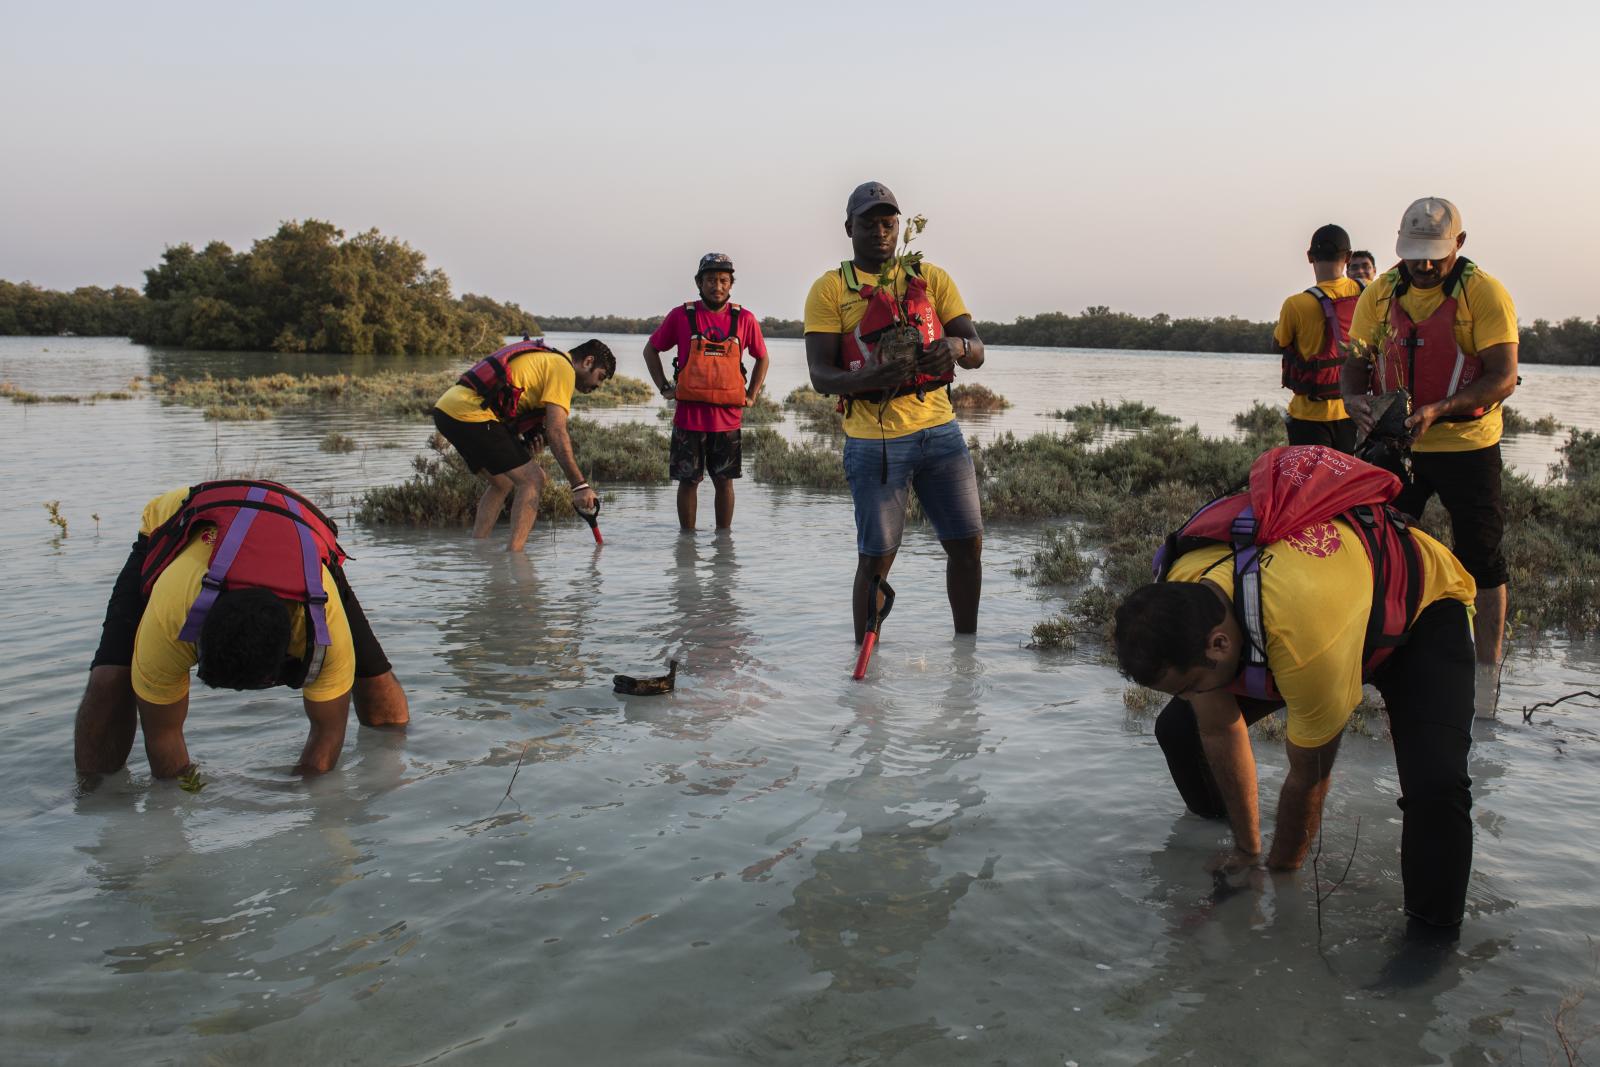 A community-based approach to conserving the UAE's mangroves | Buy this image